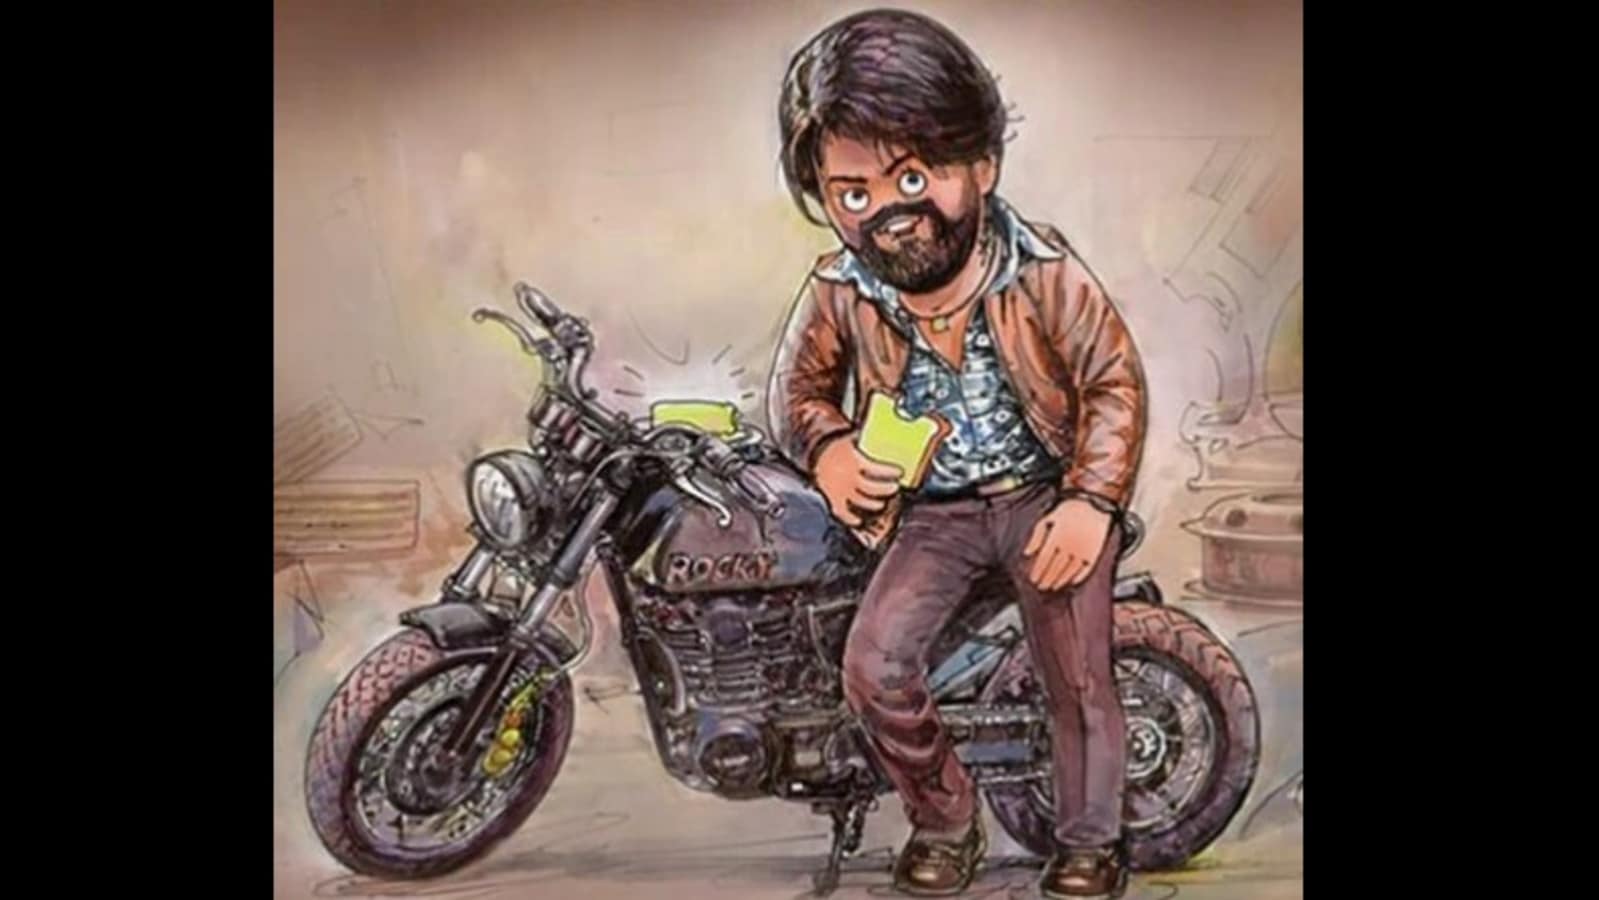 Kgf chapter 2 , Yash Drawing / outline tutorial | art, paper, drawing,  tutorial | Kgf chapter 2 , Yash Drawing / outline tutorial #kgf #kgf2  #kgfchapter2 #yash #yashdrawing #rockingstaryash #drawing #art #viral Paper  A4 size:... | By ...